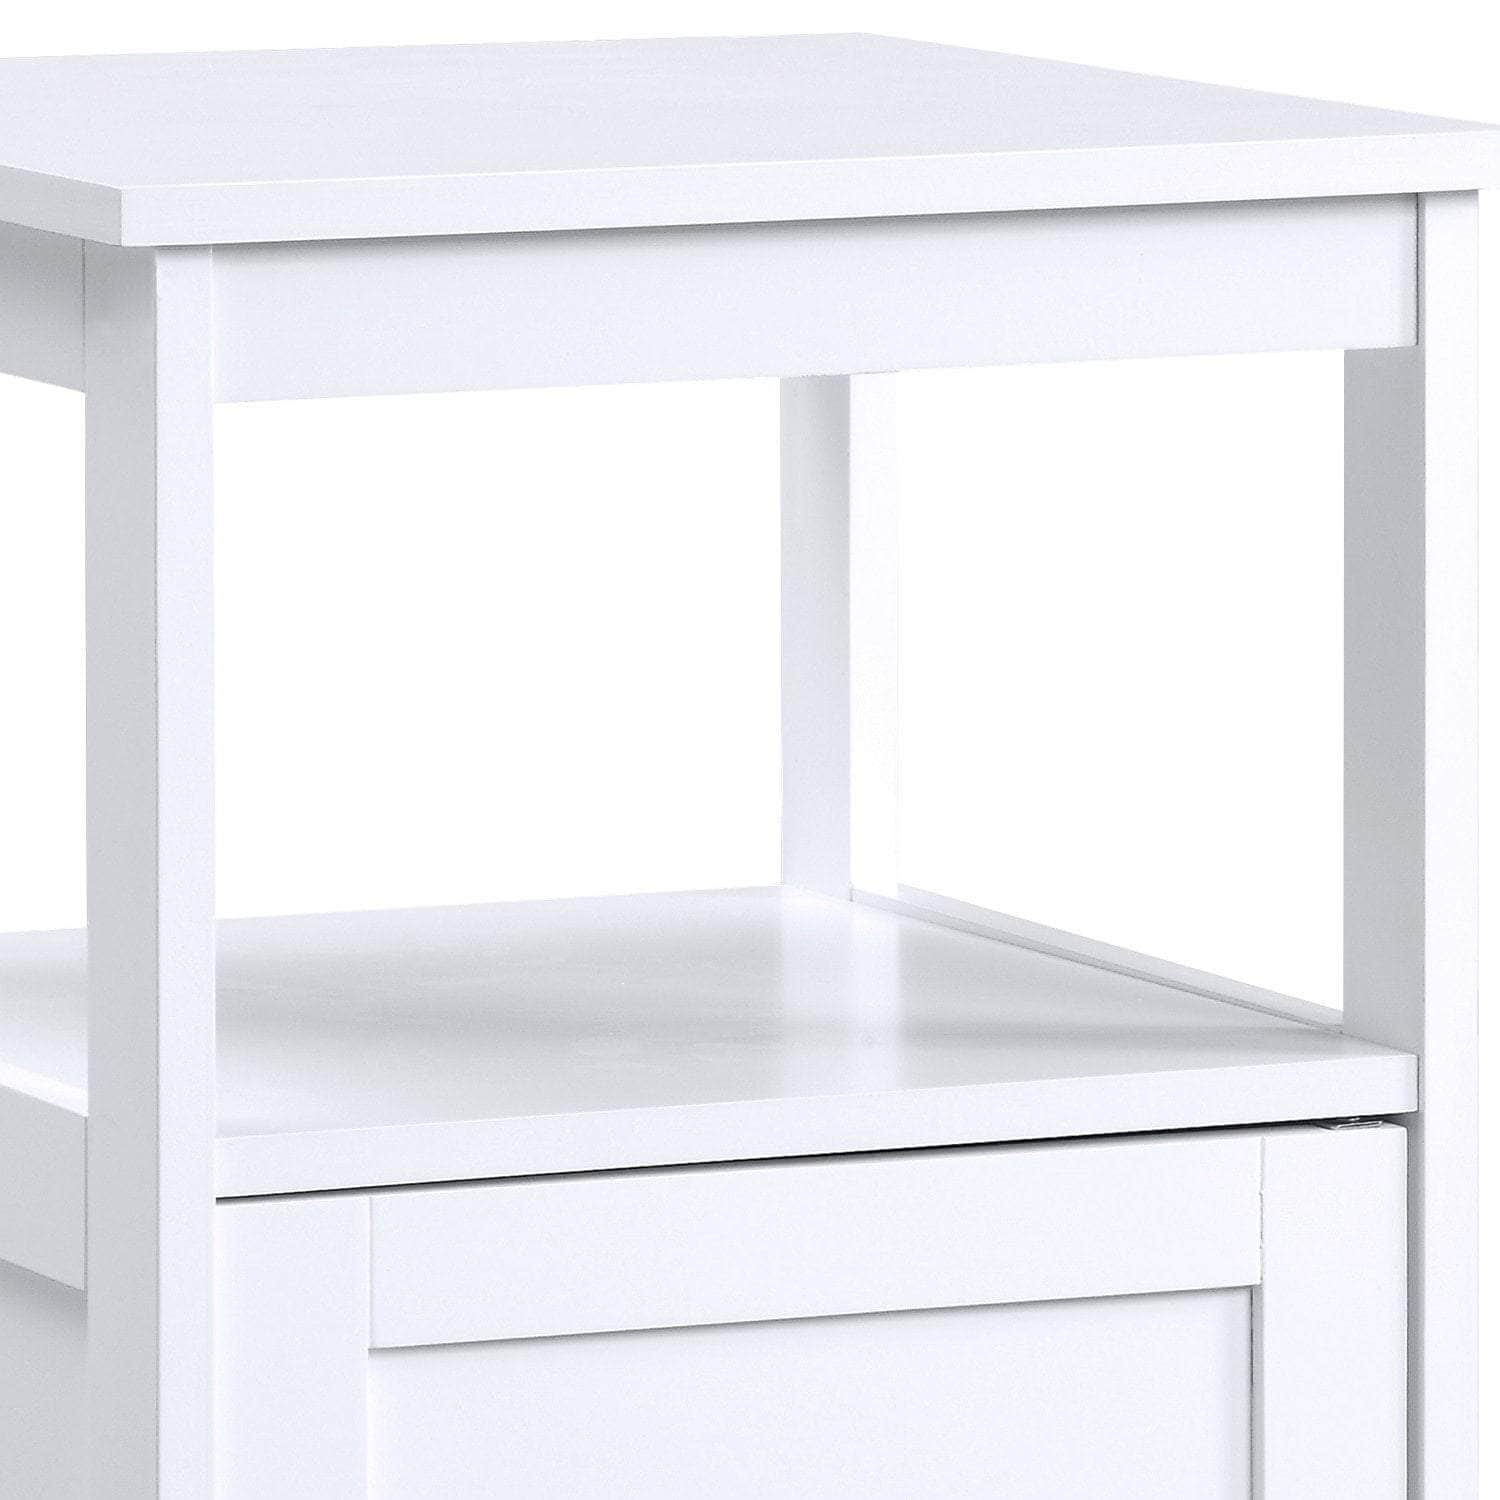 Elegant Corina End Table - A Touch of Timeless Charm